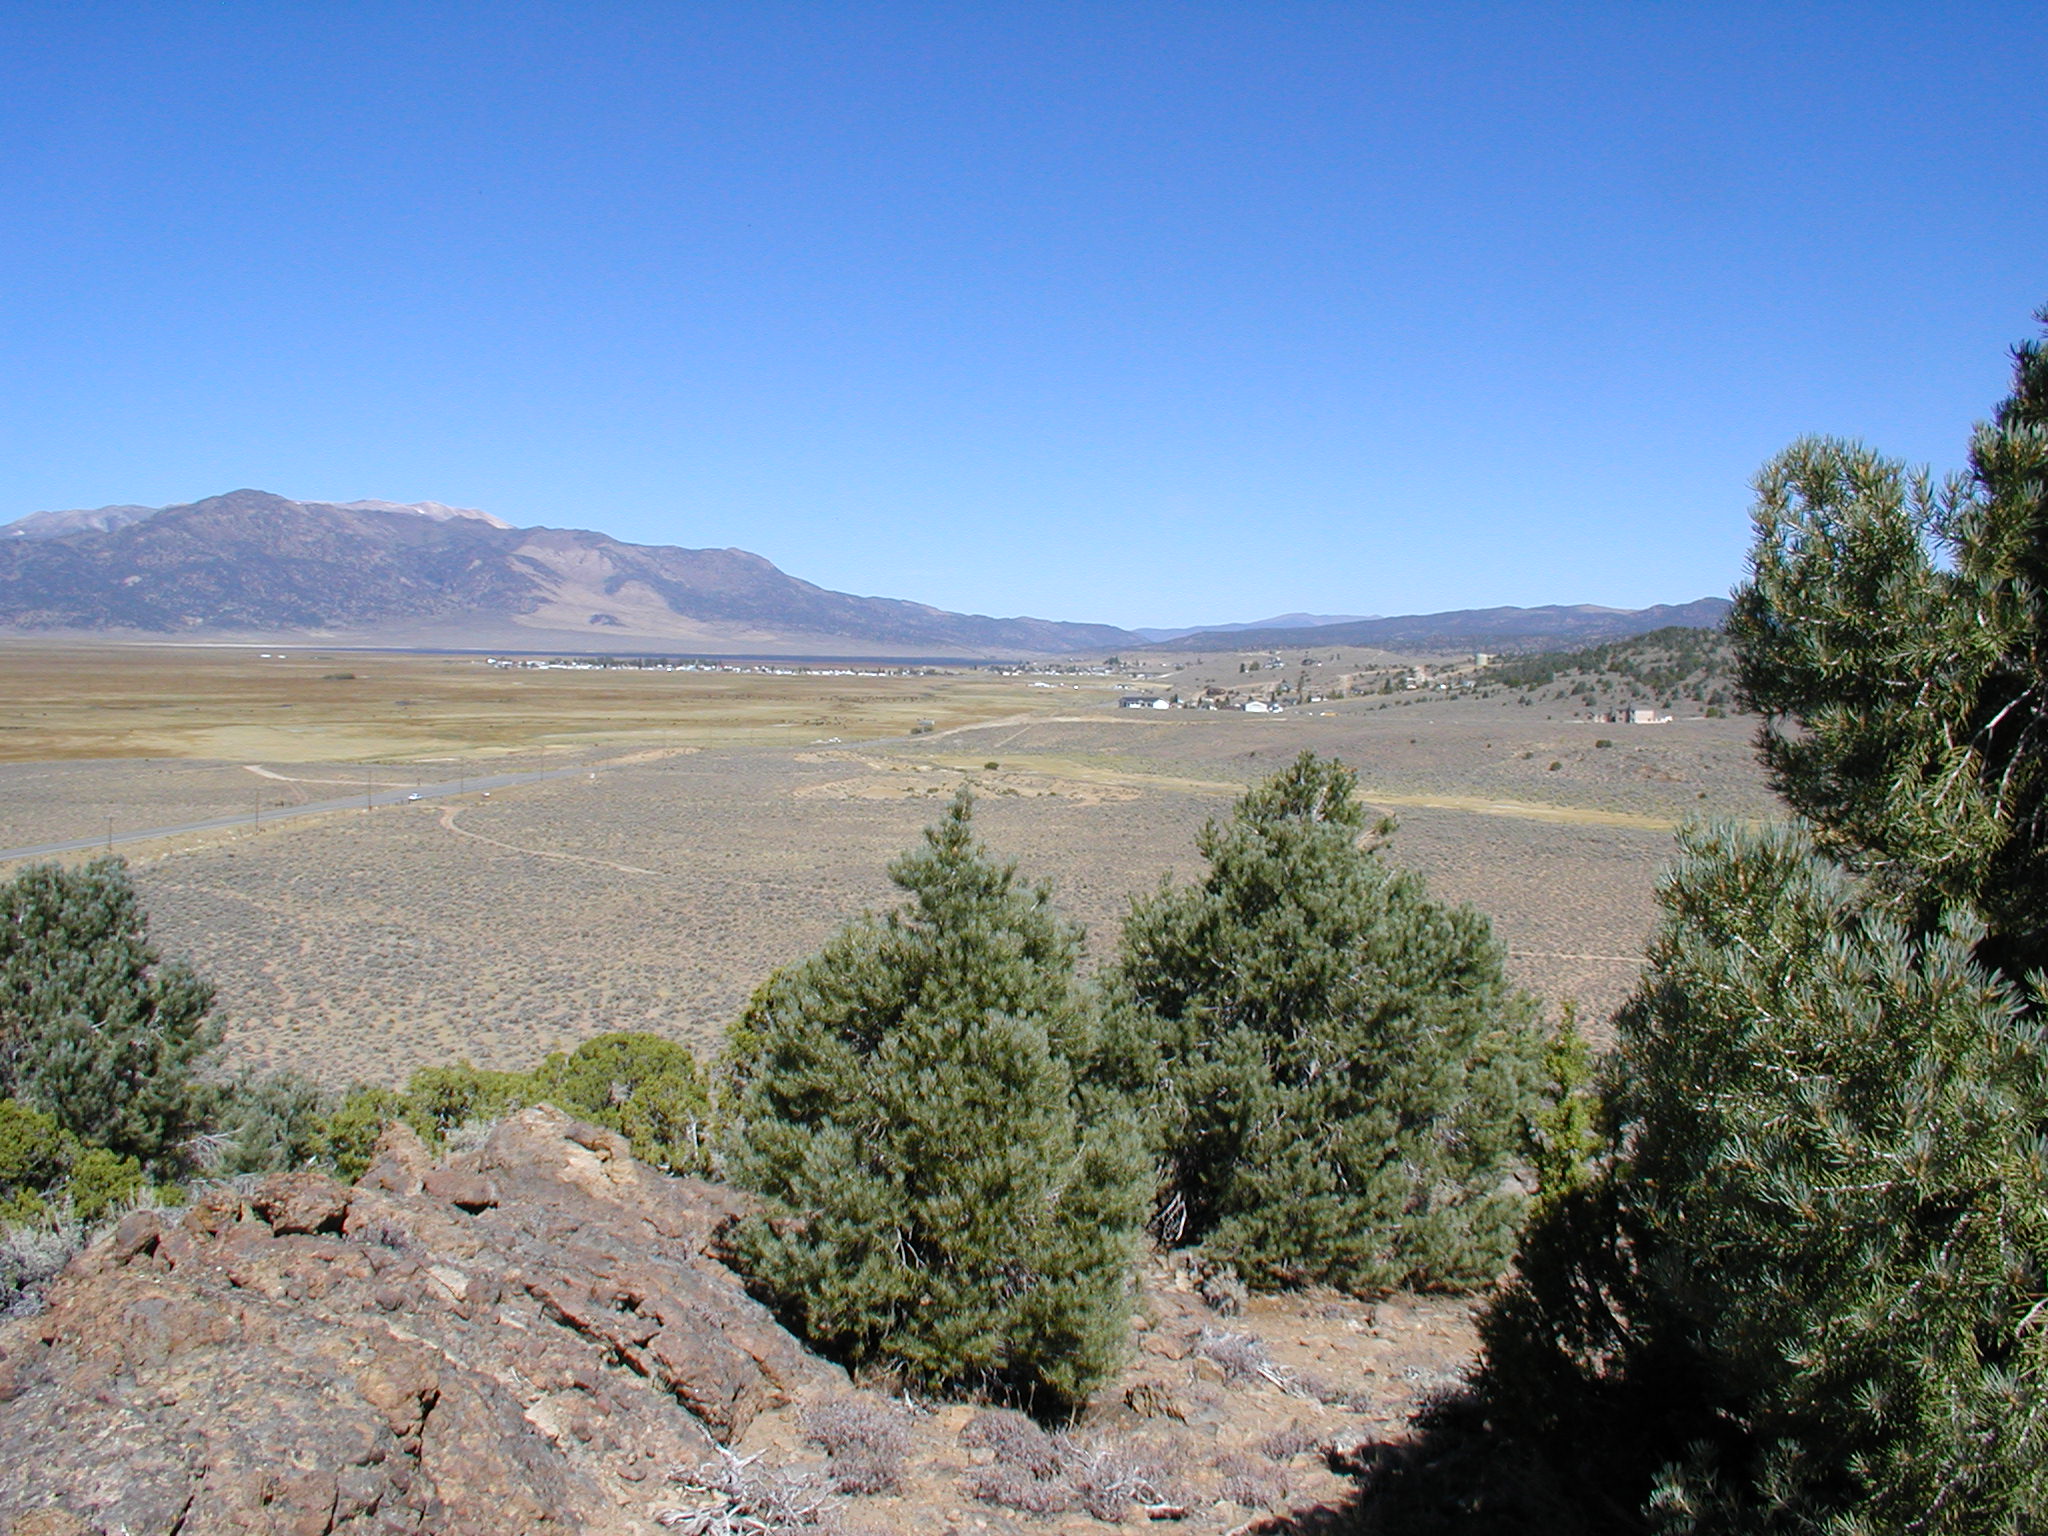 Looking north towards Bridgeport, on the Big Hot Springs conservation easement. (Photo taken in 2006 for monitoring)